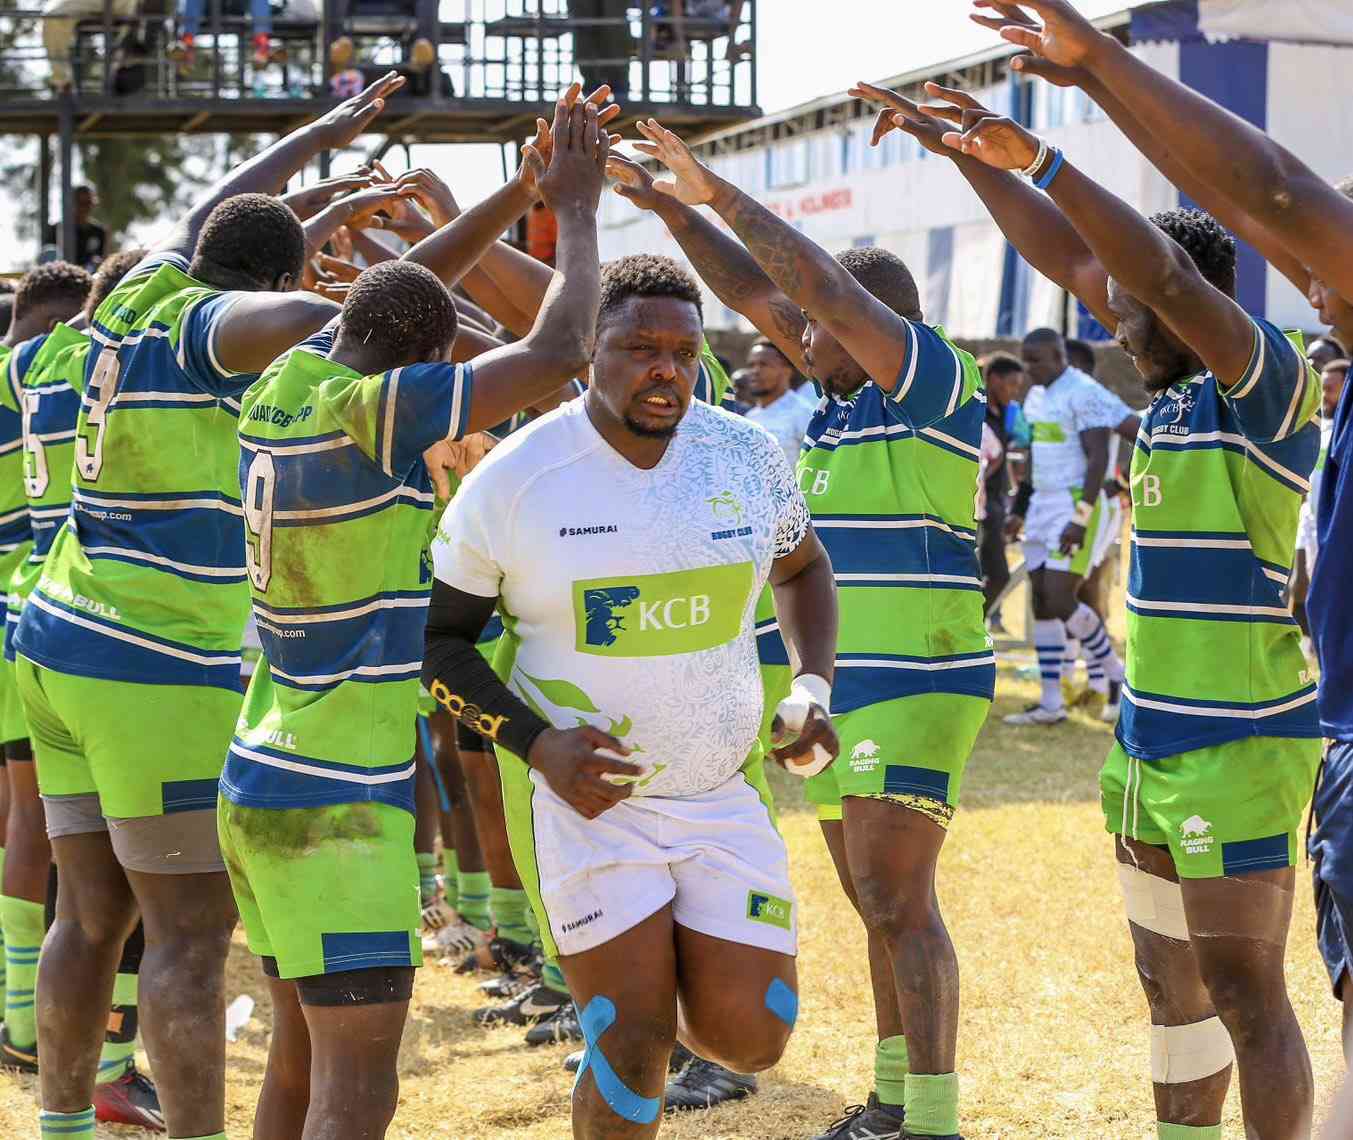 KCB captain Lilako hangs his boots after more than a decade